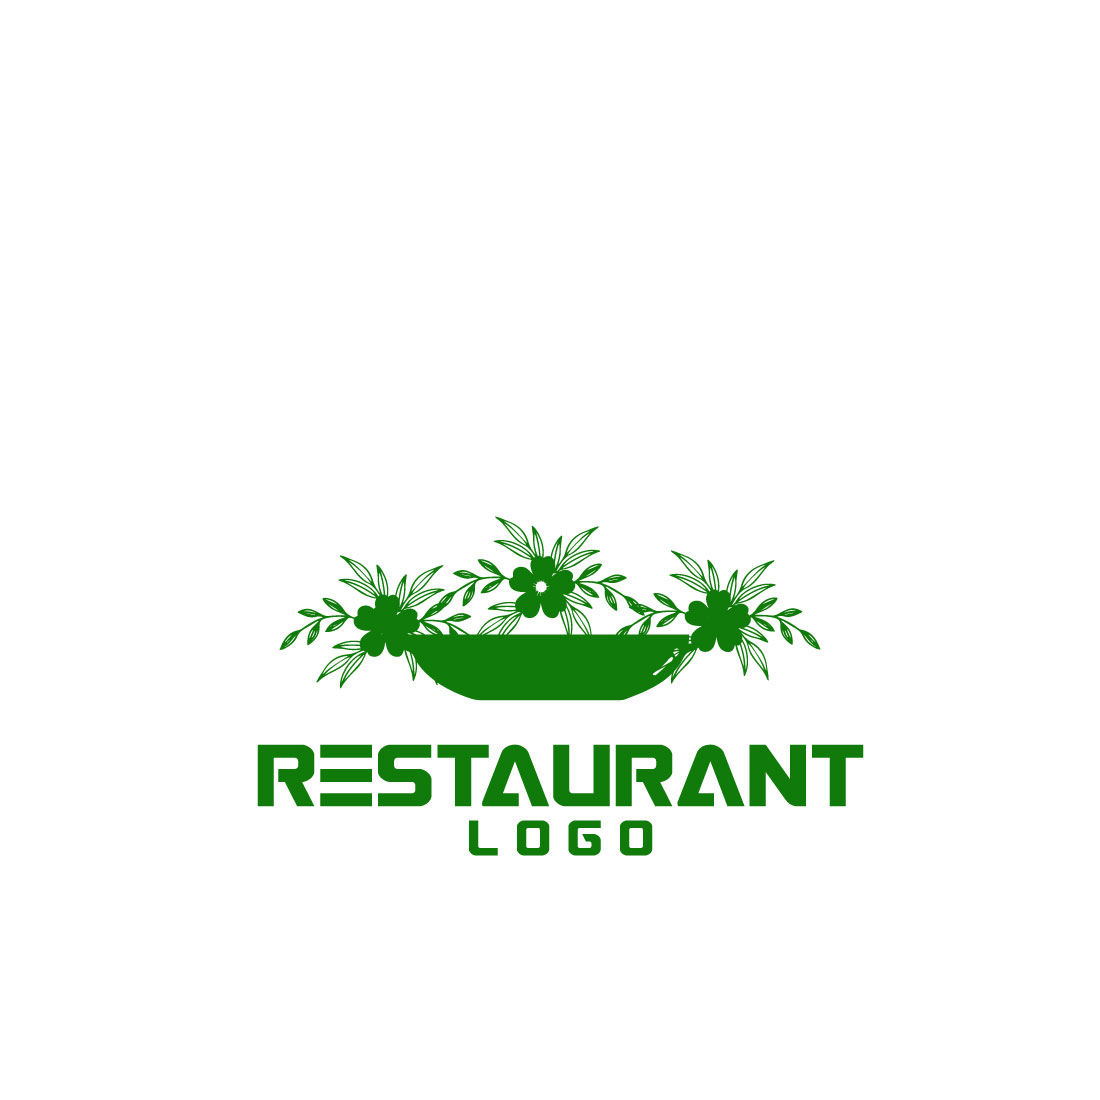 Free Culinary Creations logo preview image.